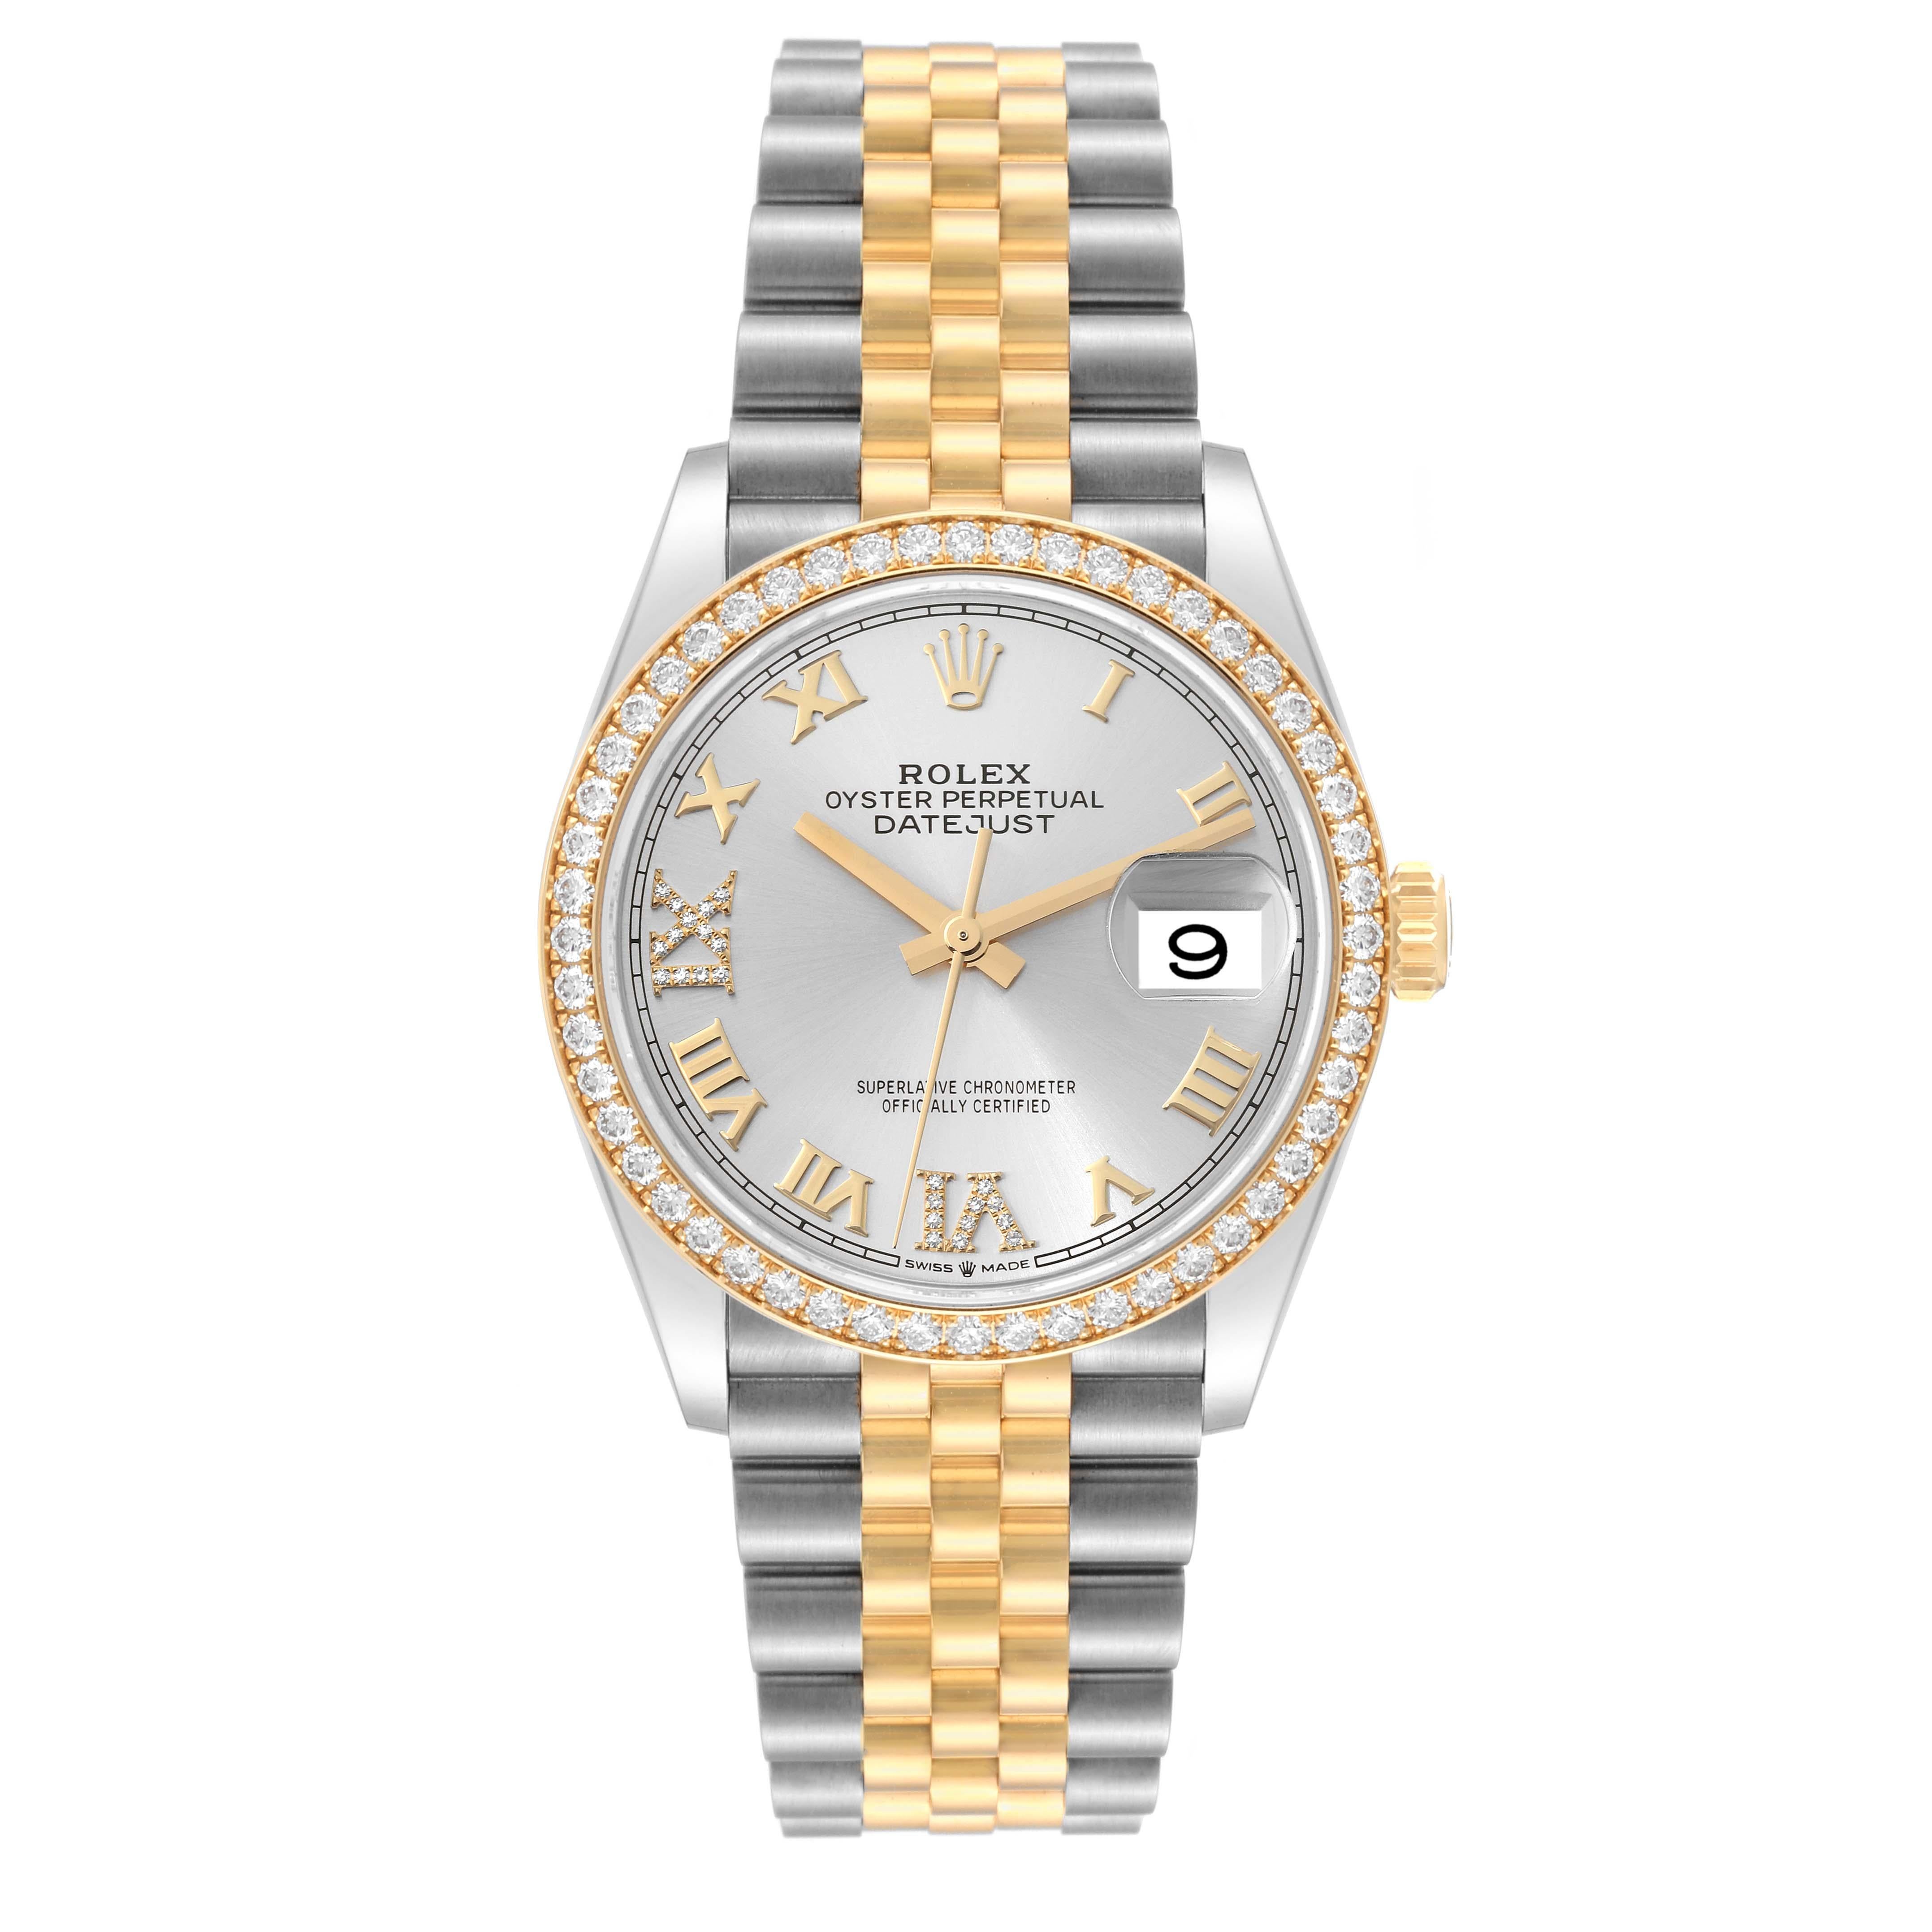 Rolex Datejust Steel Yellow Gold Silver Dial Diamond Mens Watch 126283 Unworn. Officially certified chronometer automatic self-winding movement. Stainless steel and 18K yellow gold oyster case 36.0 mm in diameter. Rolex logo on 18K yellow gold